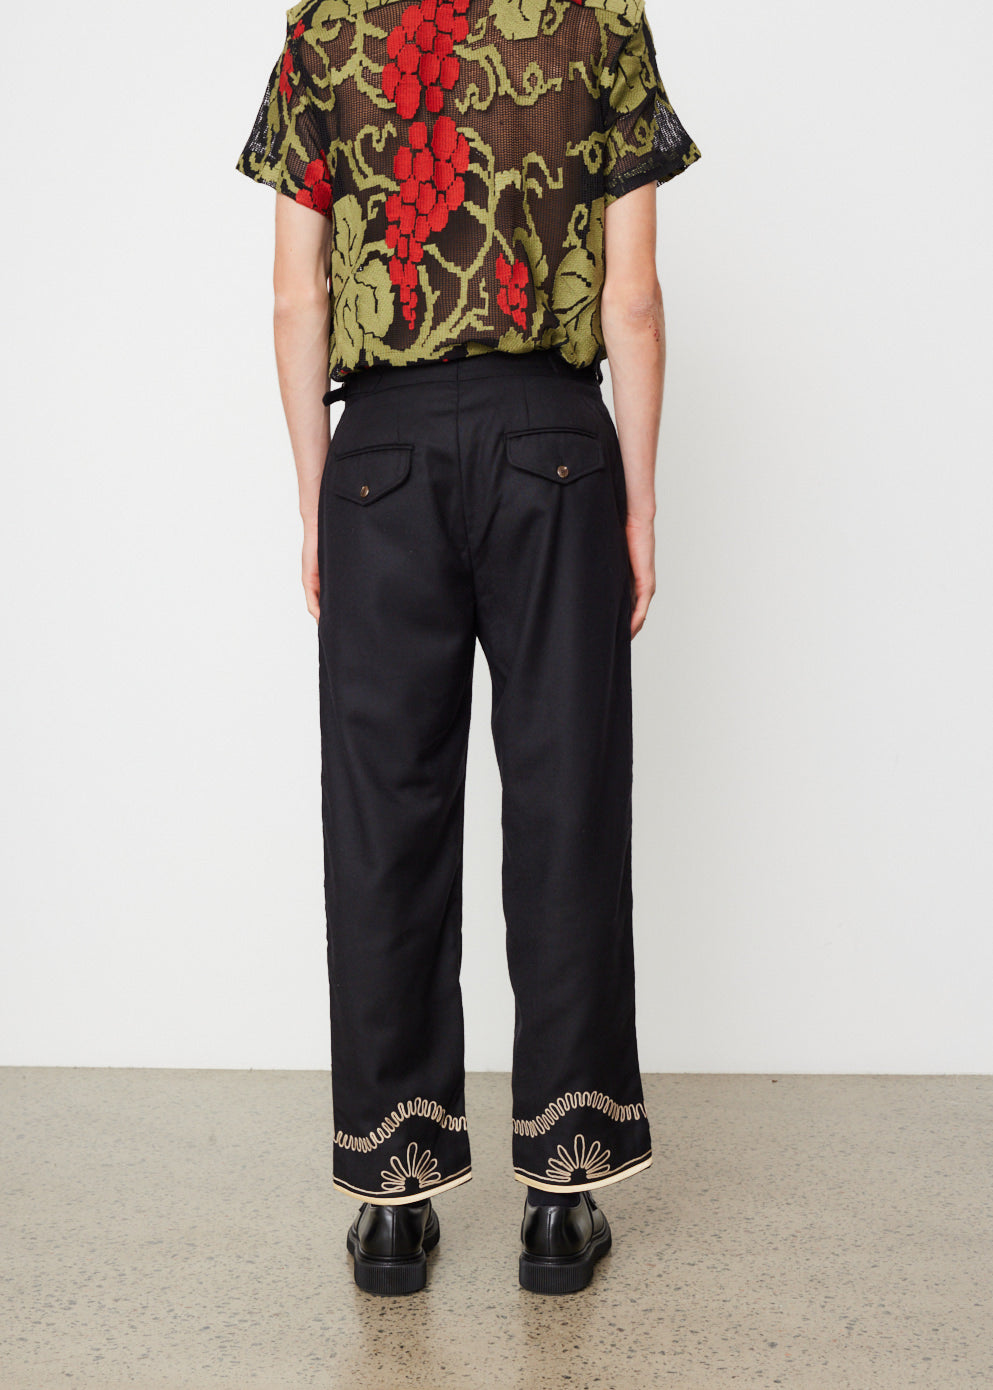 Floral Cording Trousers